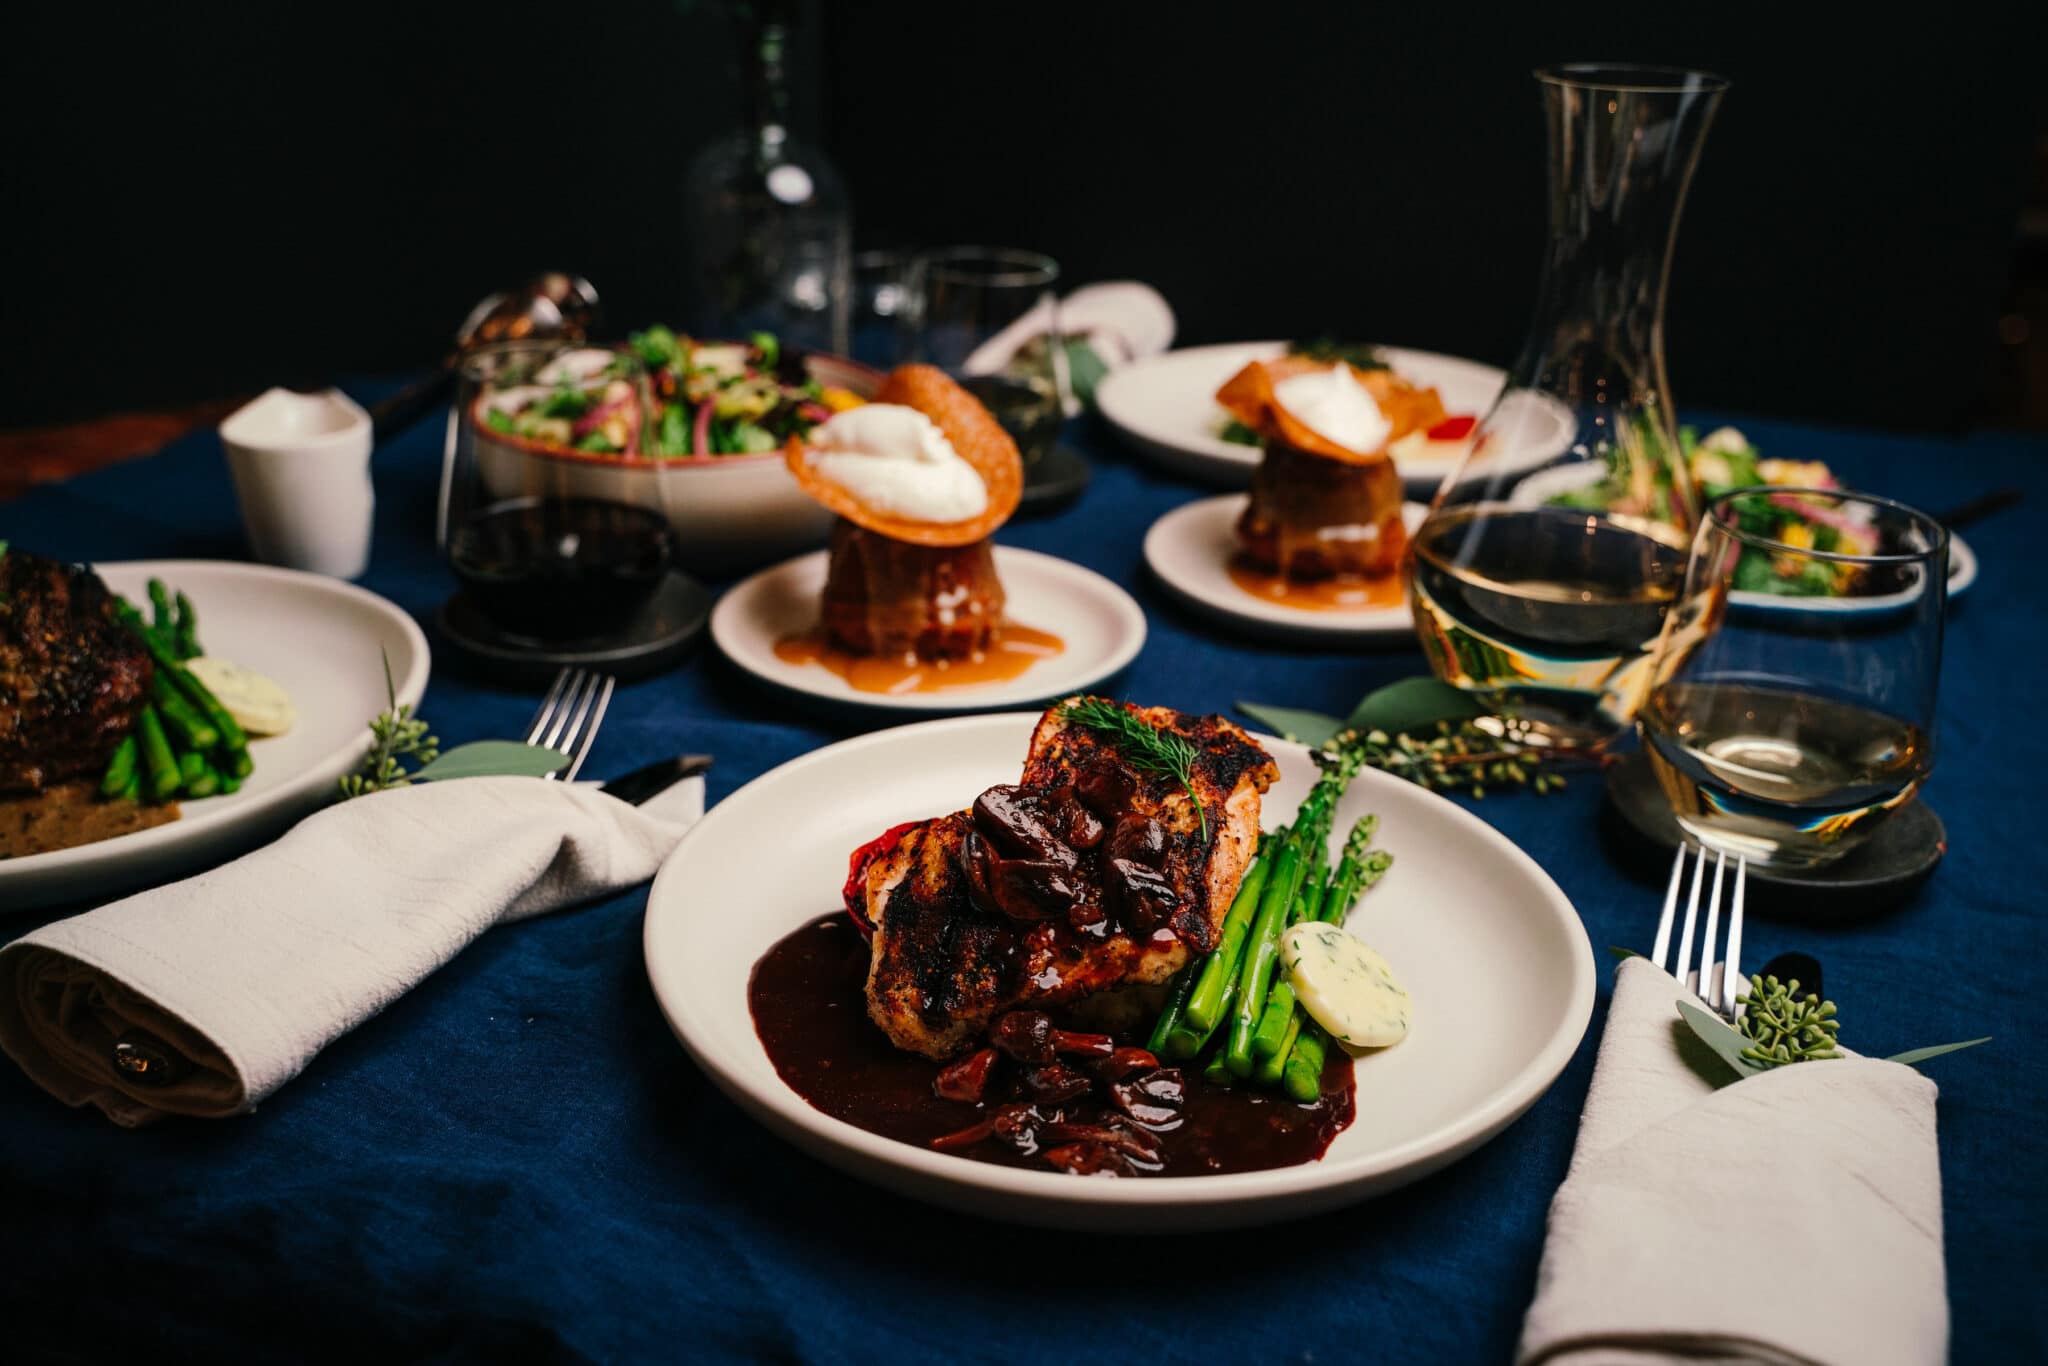 A full take-away heat-and-serve meal plated and paired with wine, laid out on a fancy table setting